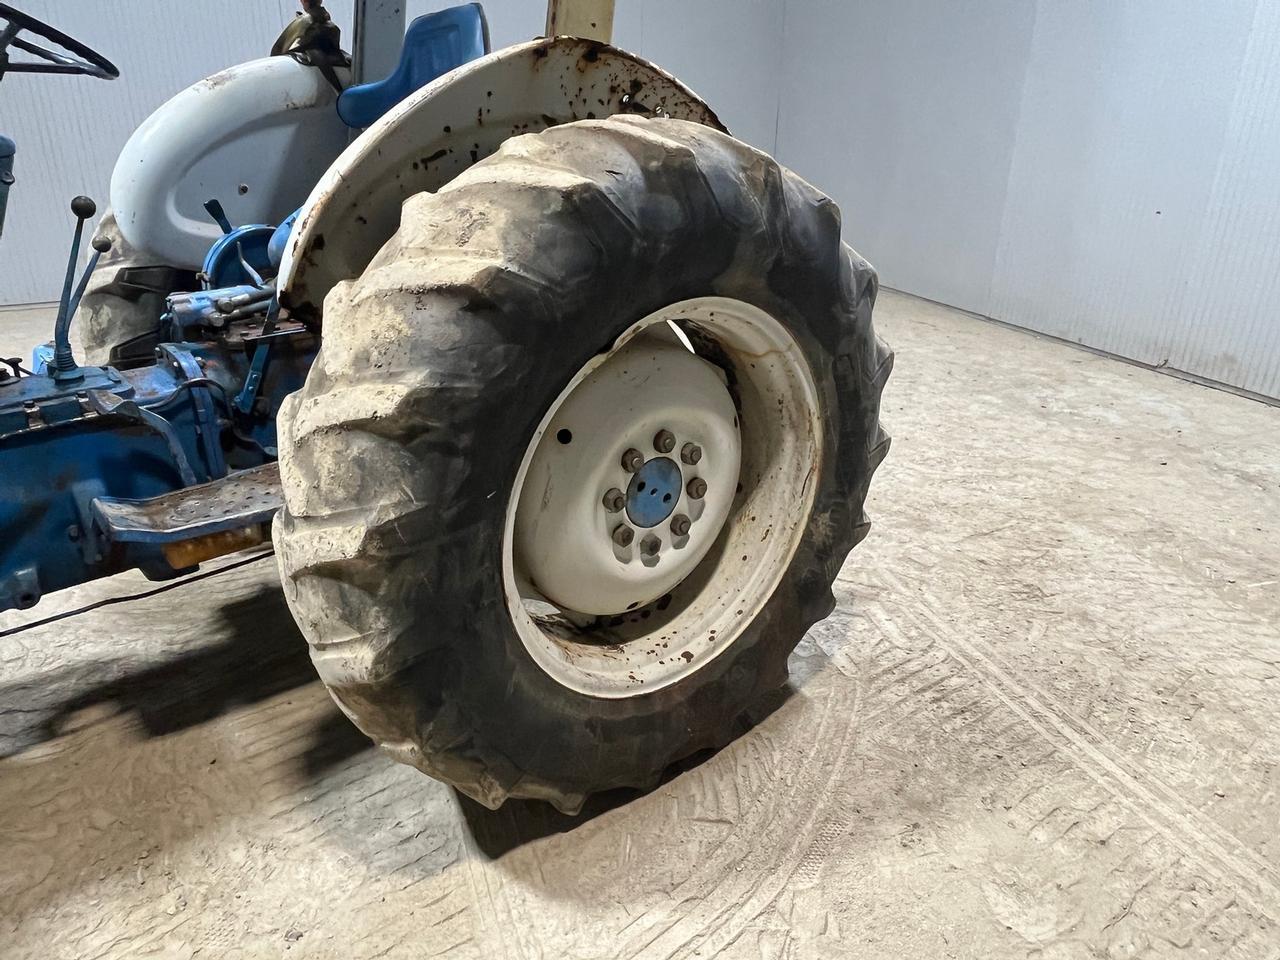 Ford 3910 Tractor